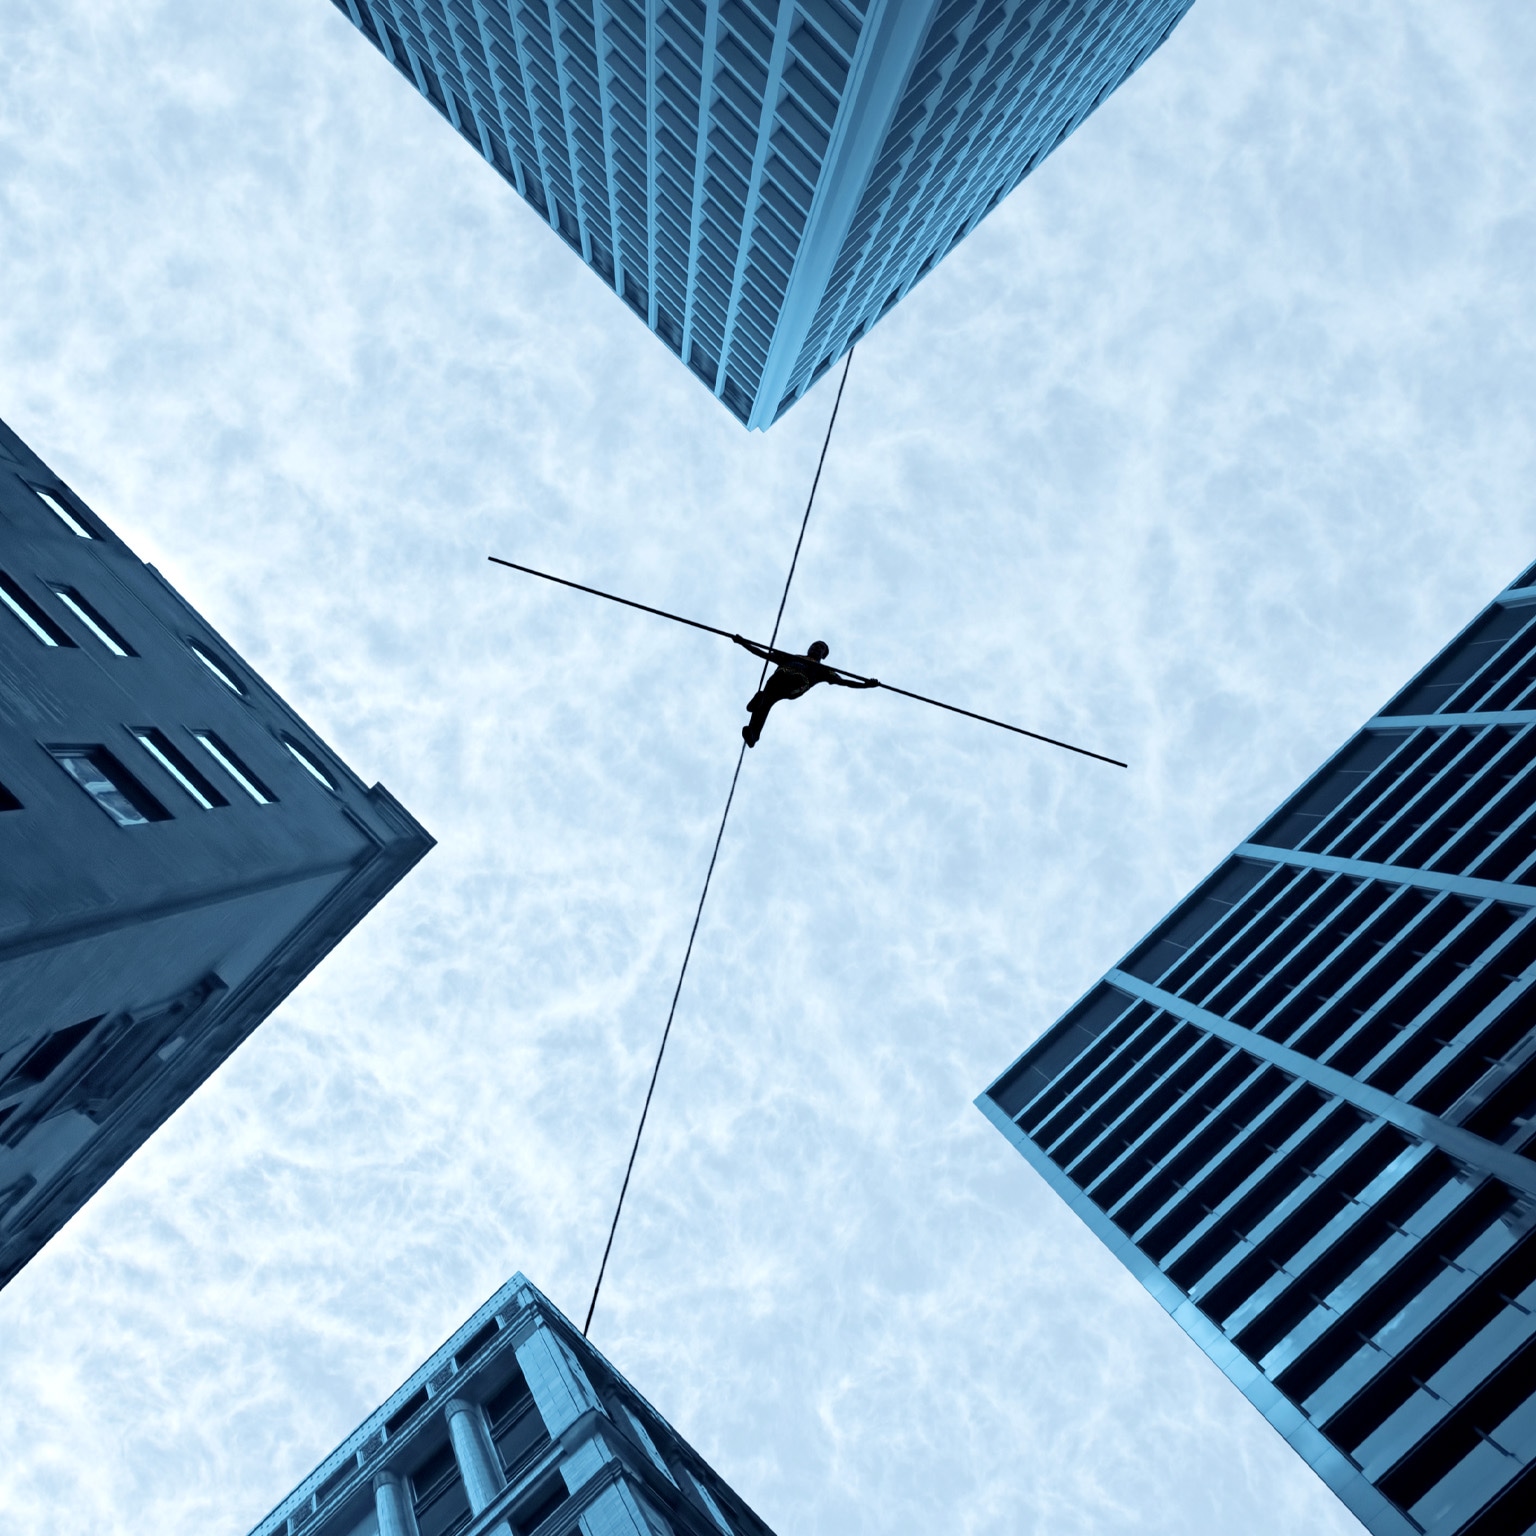 Performer walking a tightrope in between four high rise buildings.